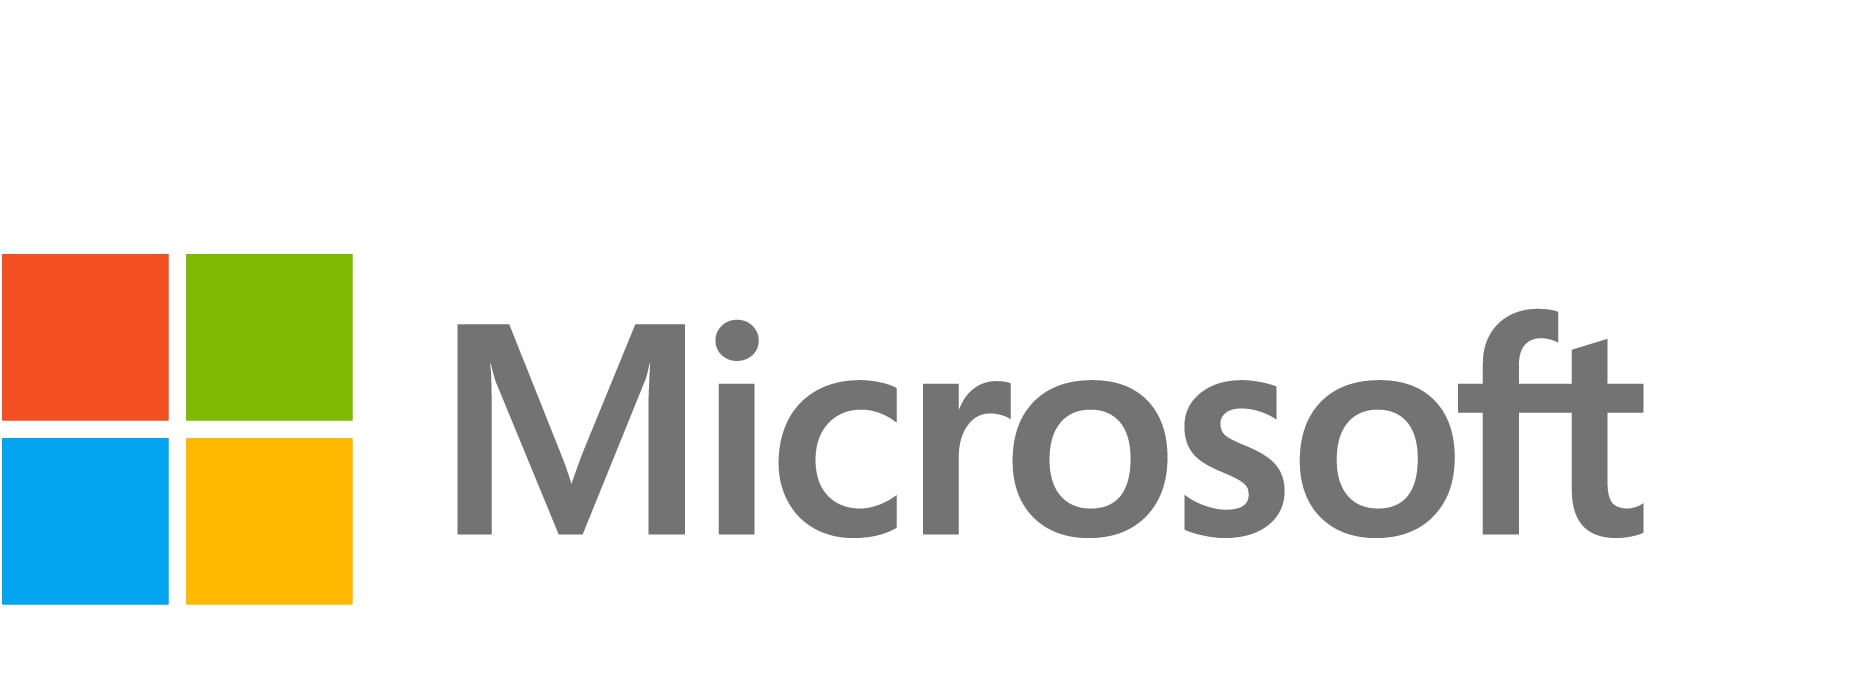 Microsoft Complete for Business Plus - extended service agreement - 4 years